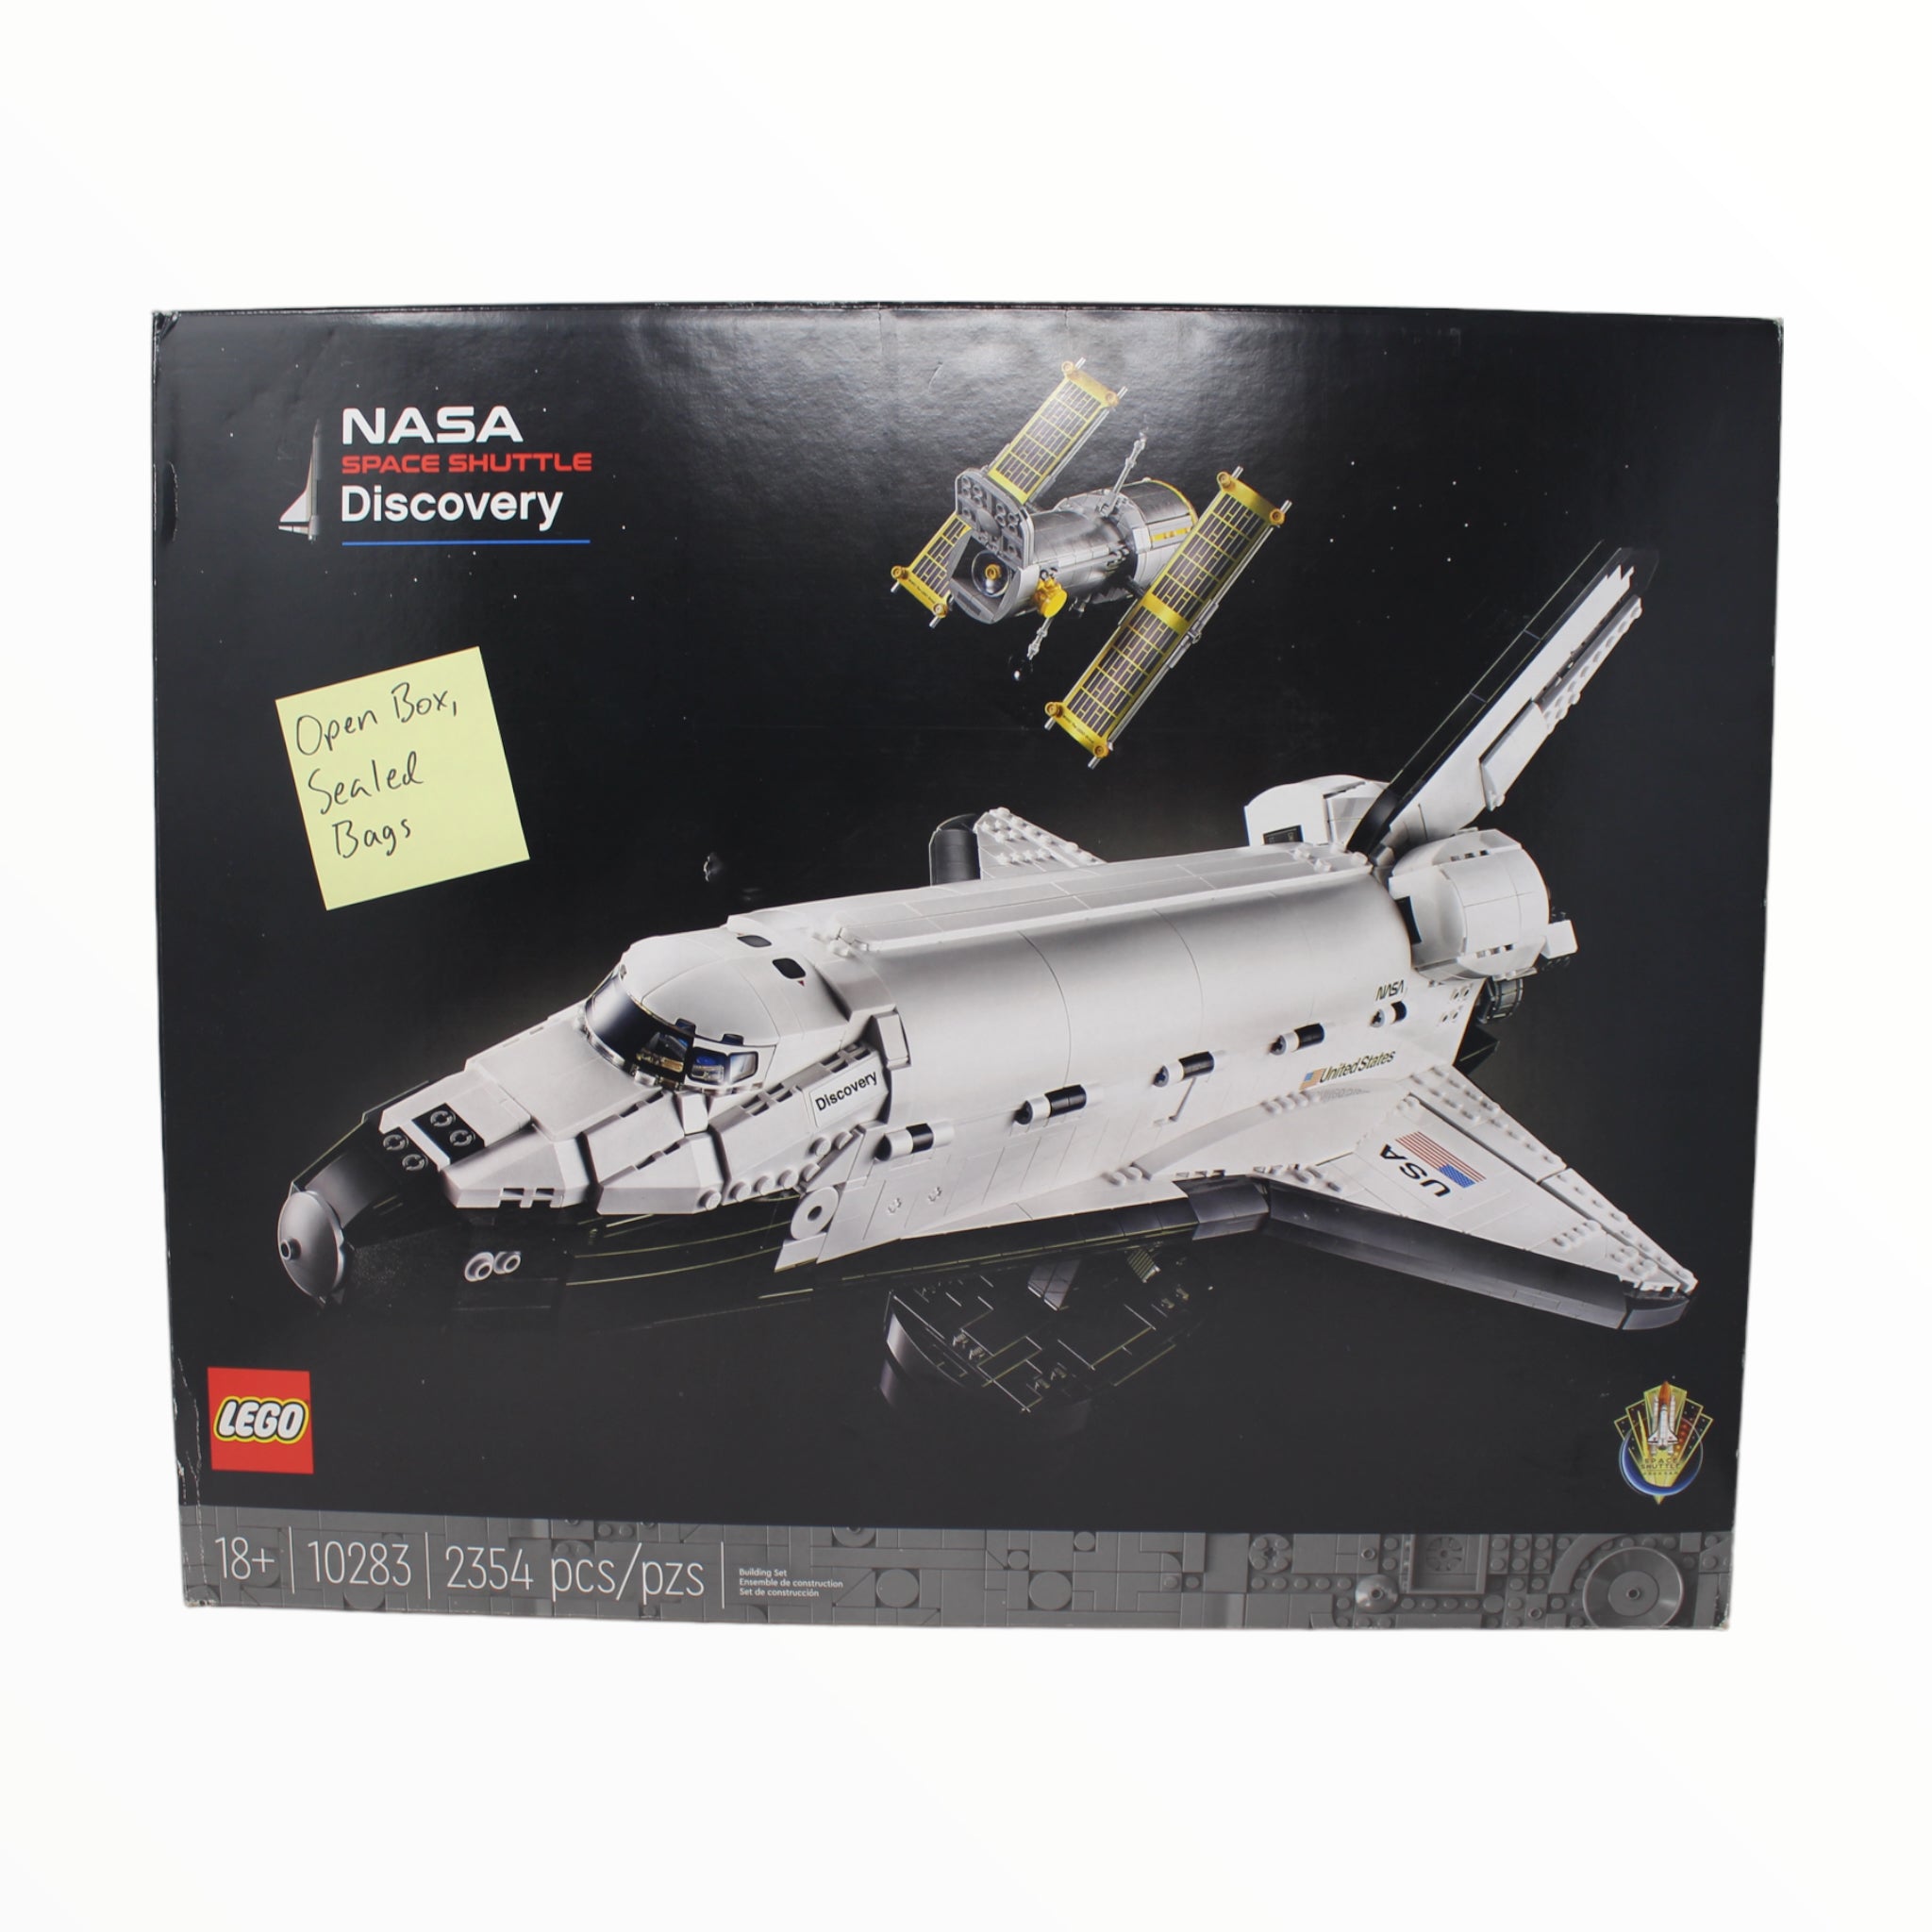 Monica Bevæger sig ikke Withered Certified Used Set 10283 LEGO NASA Space Shuttle Discovery (open box,